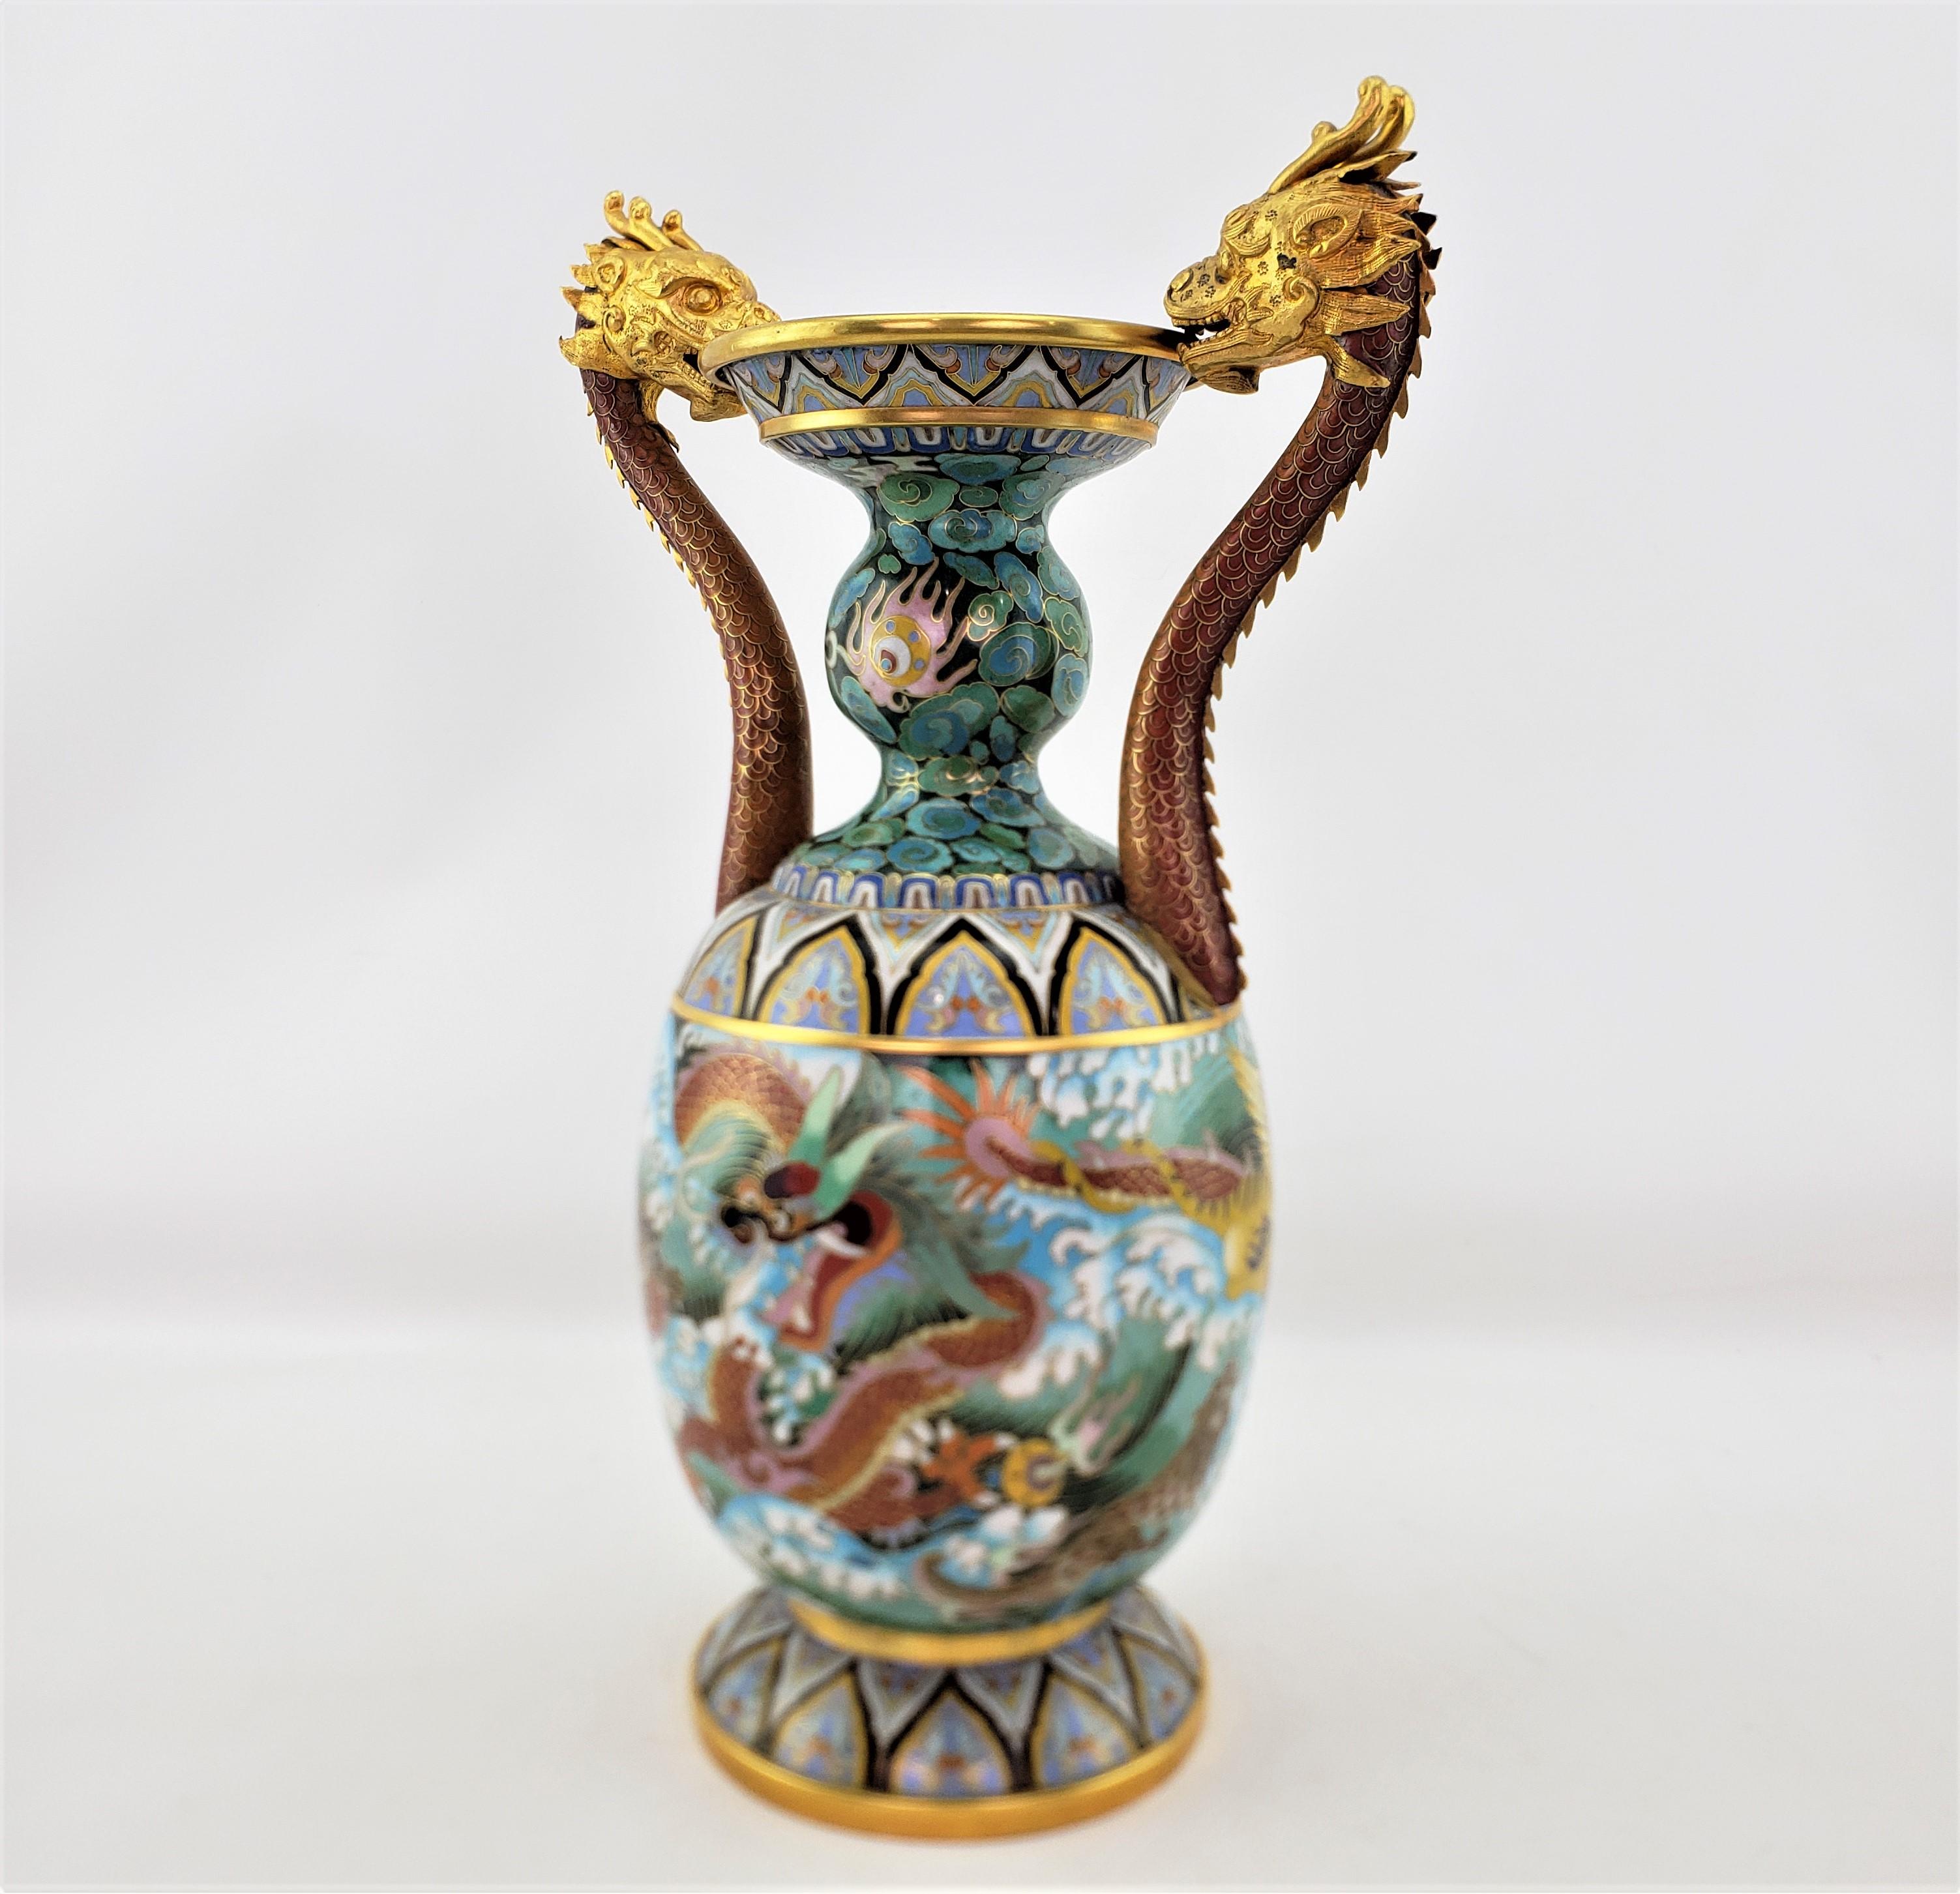 20th Century Large Vintage Decorative Chinese Cloissone Vase with Imperial Dragon Handles For Sale